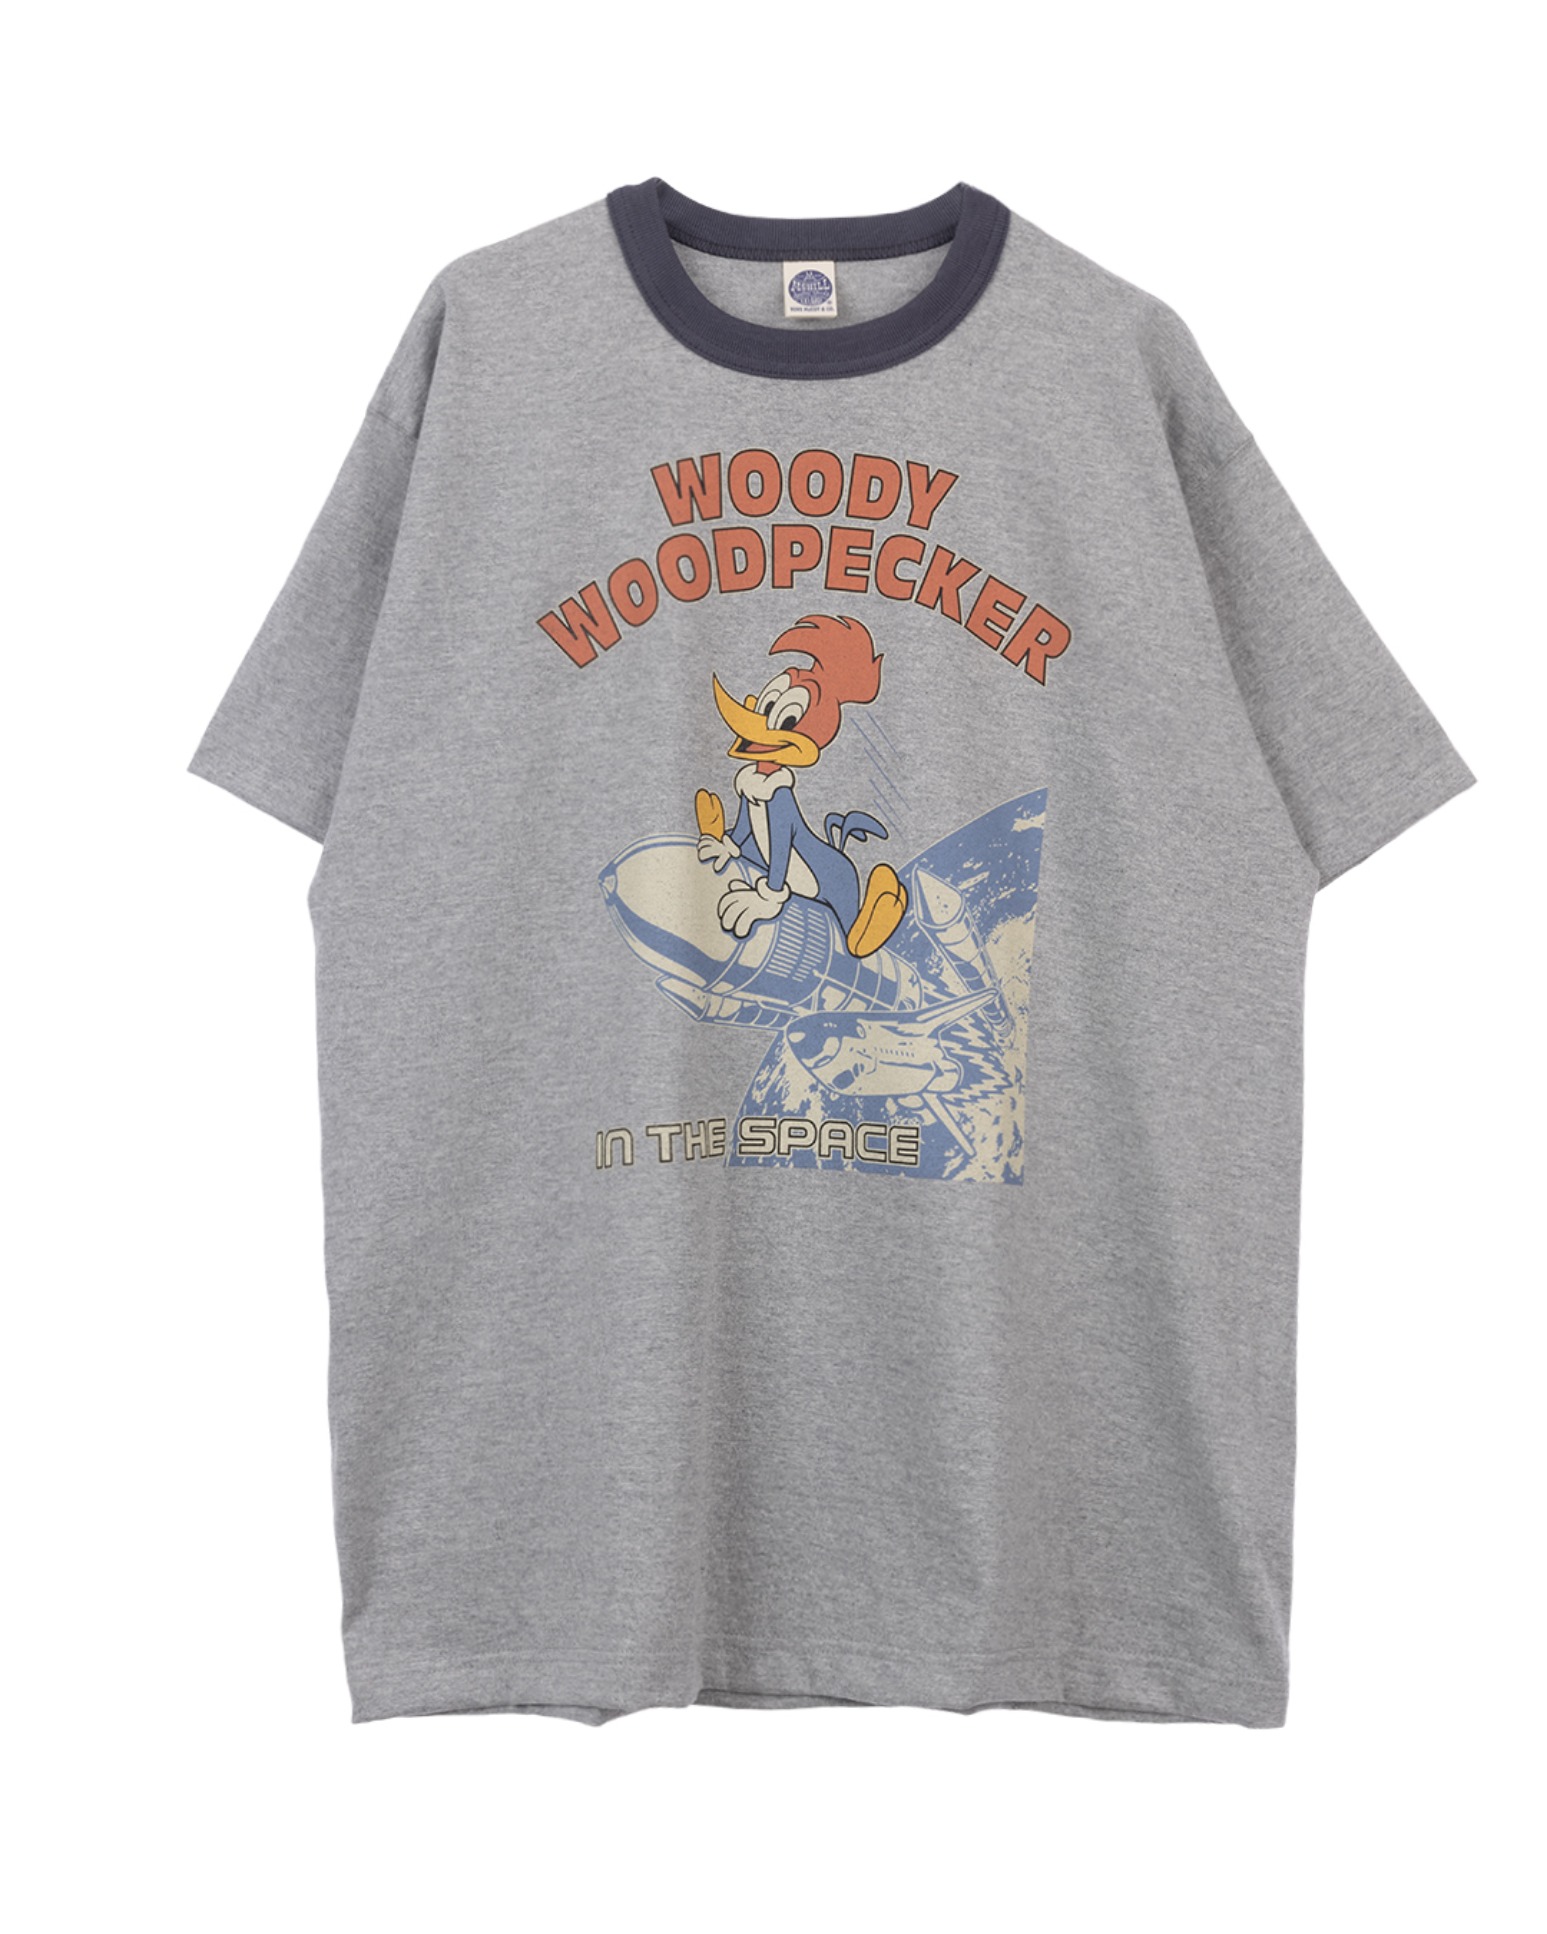 TMC2408 WOODY WOODPECKER TEE &quot;WOODY WOODPECKER IN THE SPACE&quot;(Ash)